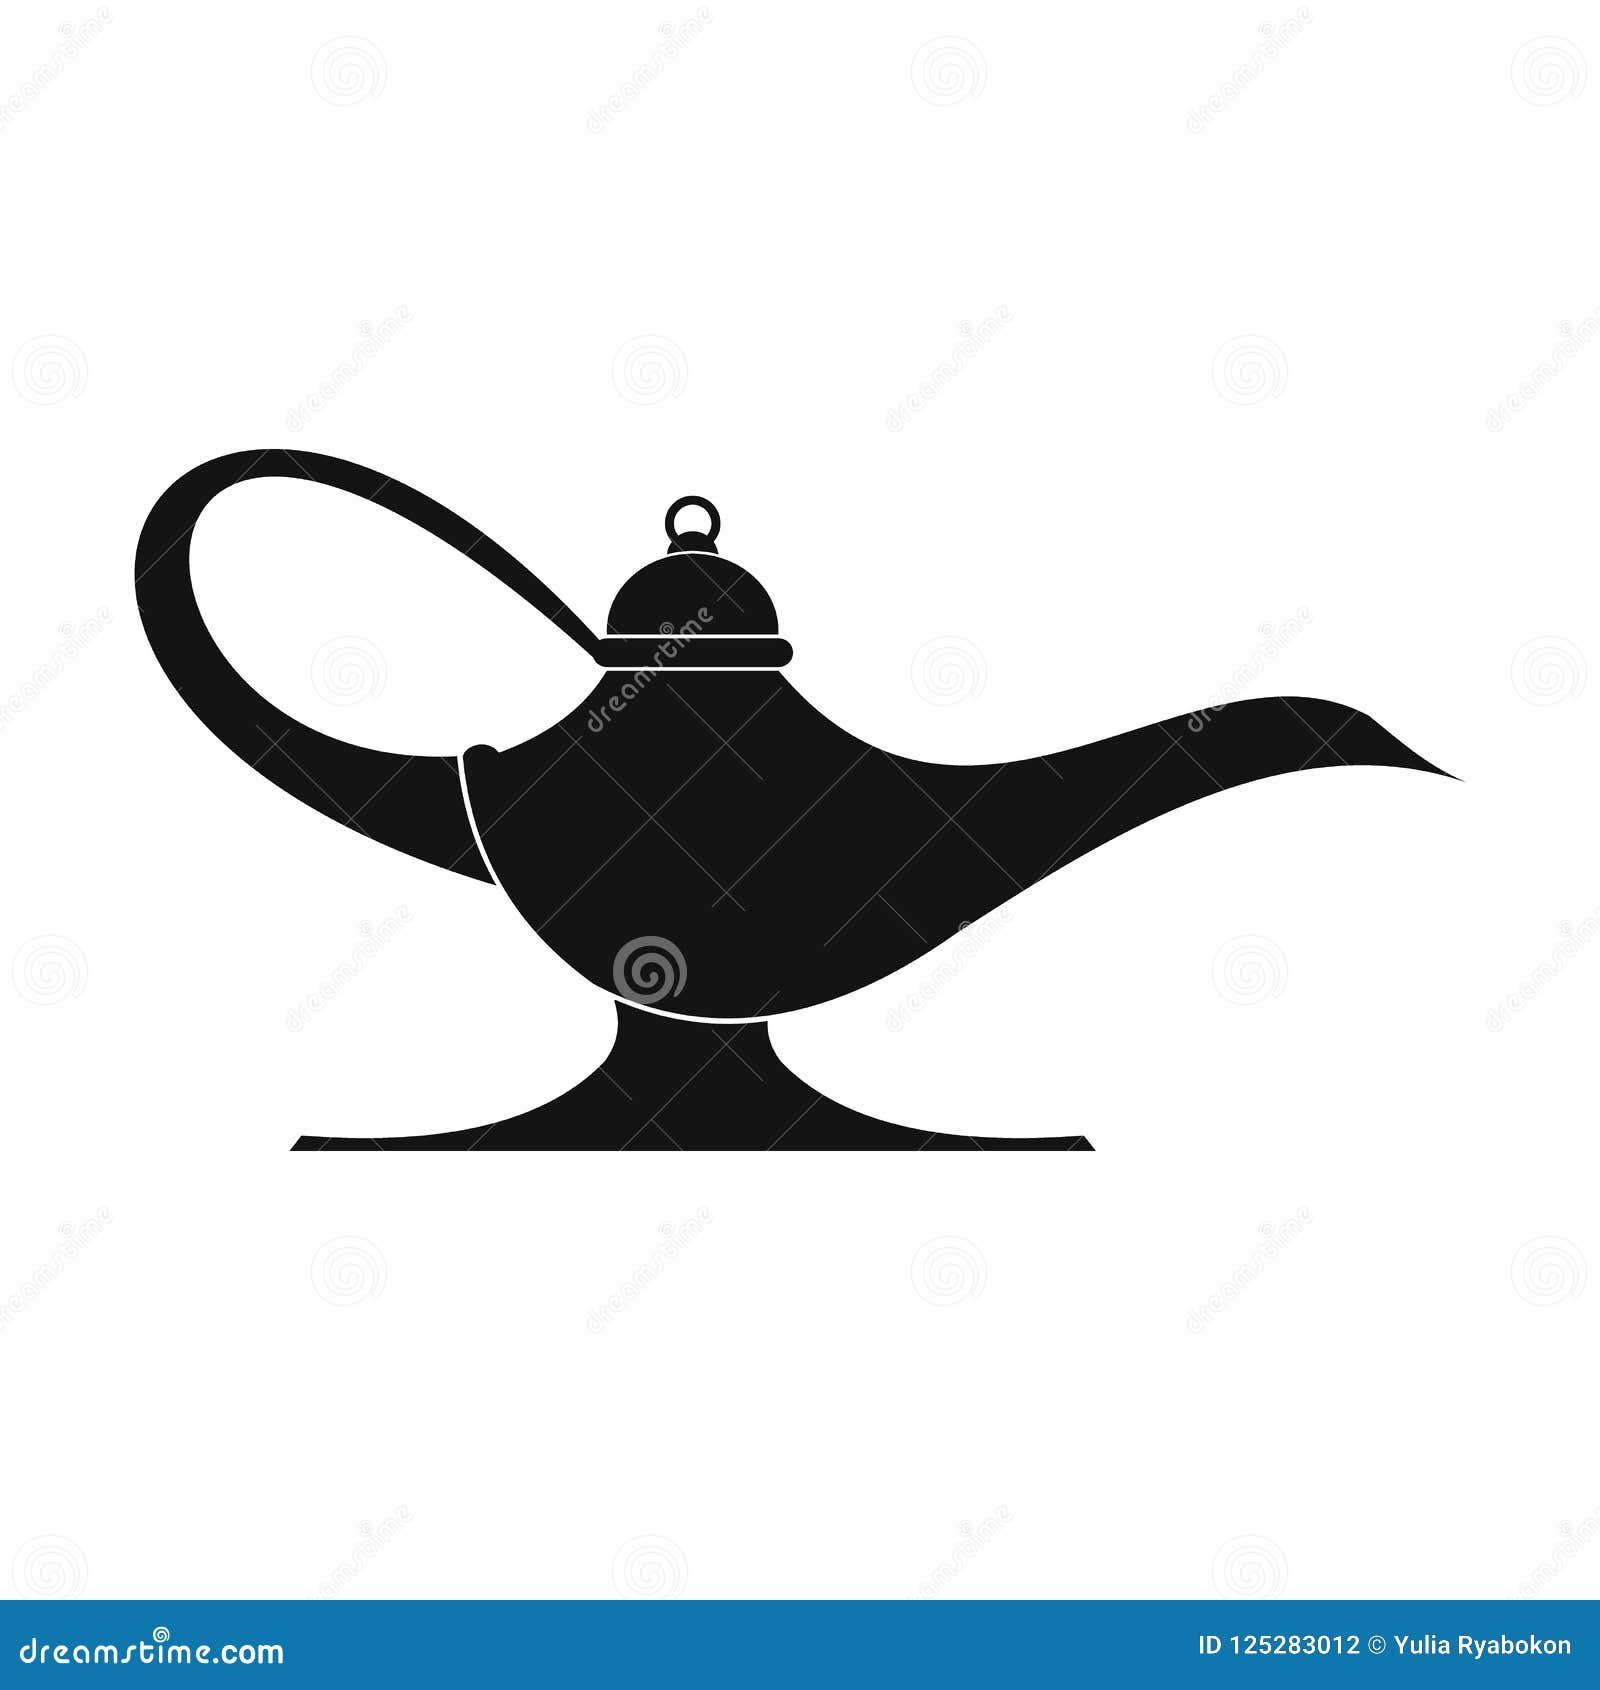 Middle east oil lamp stock illustration. Illustration of magical ...